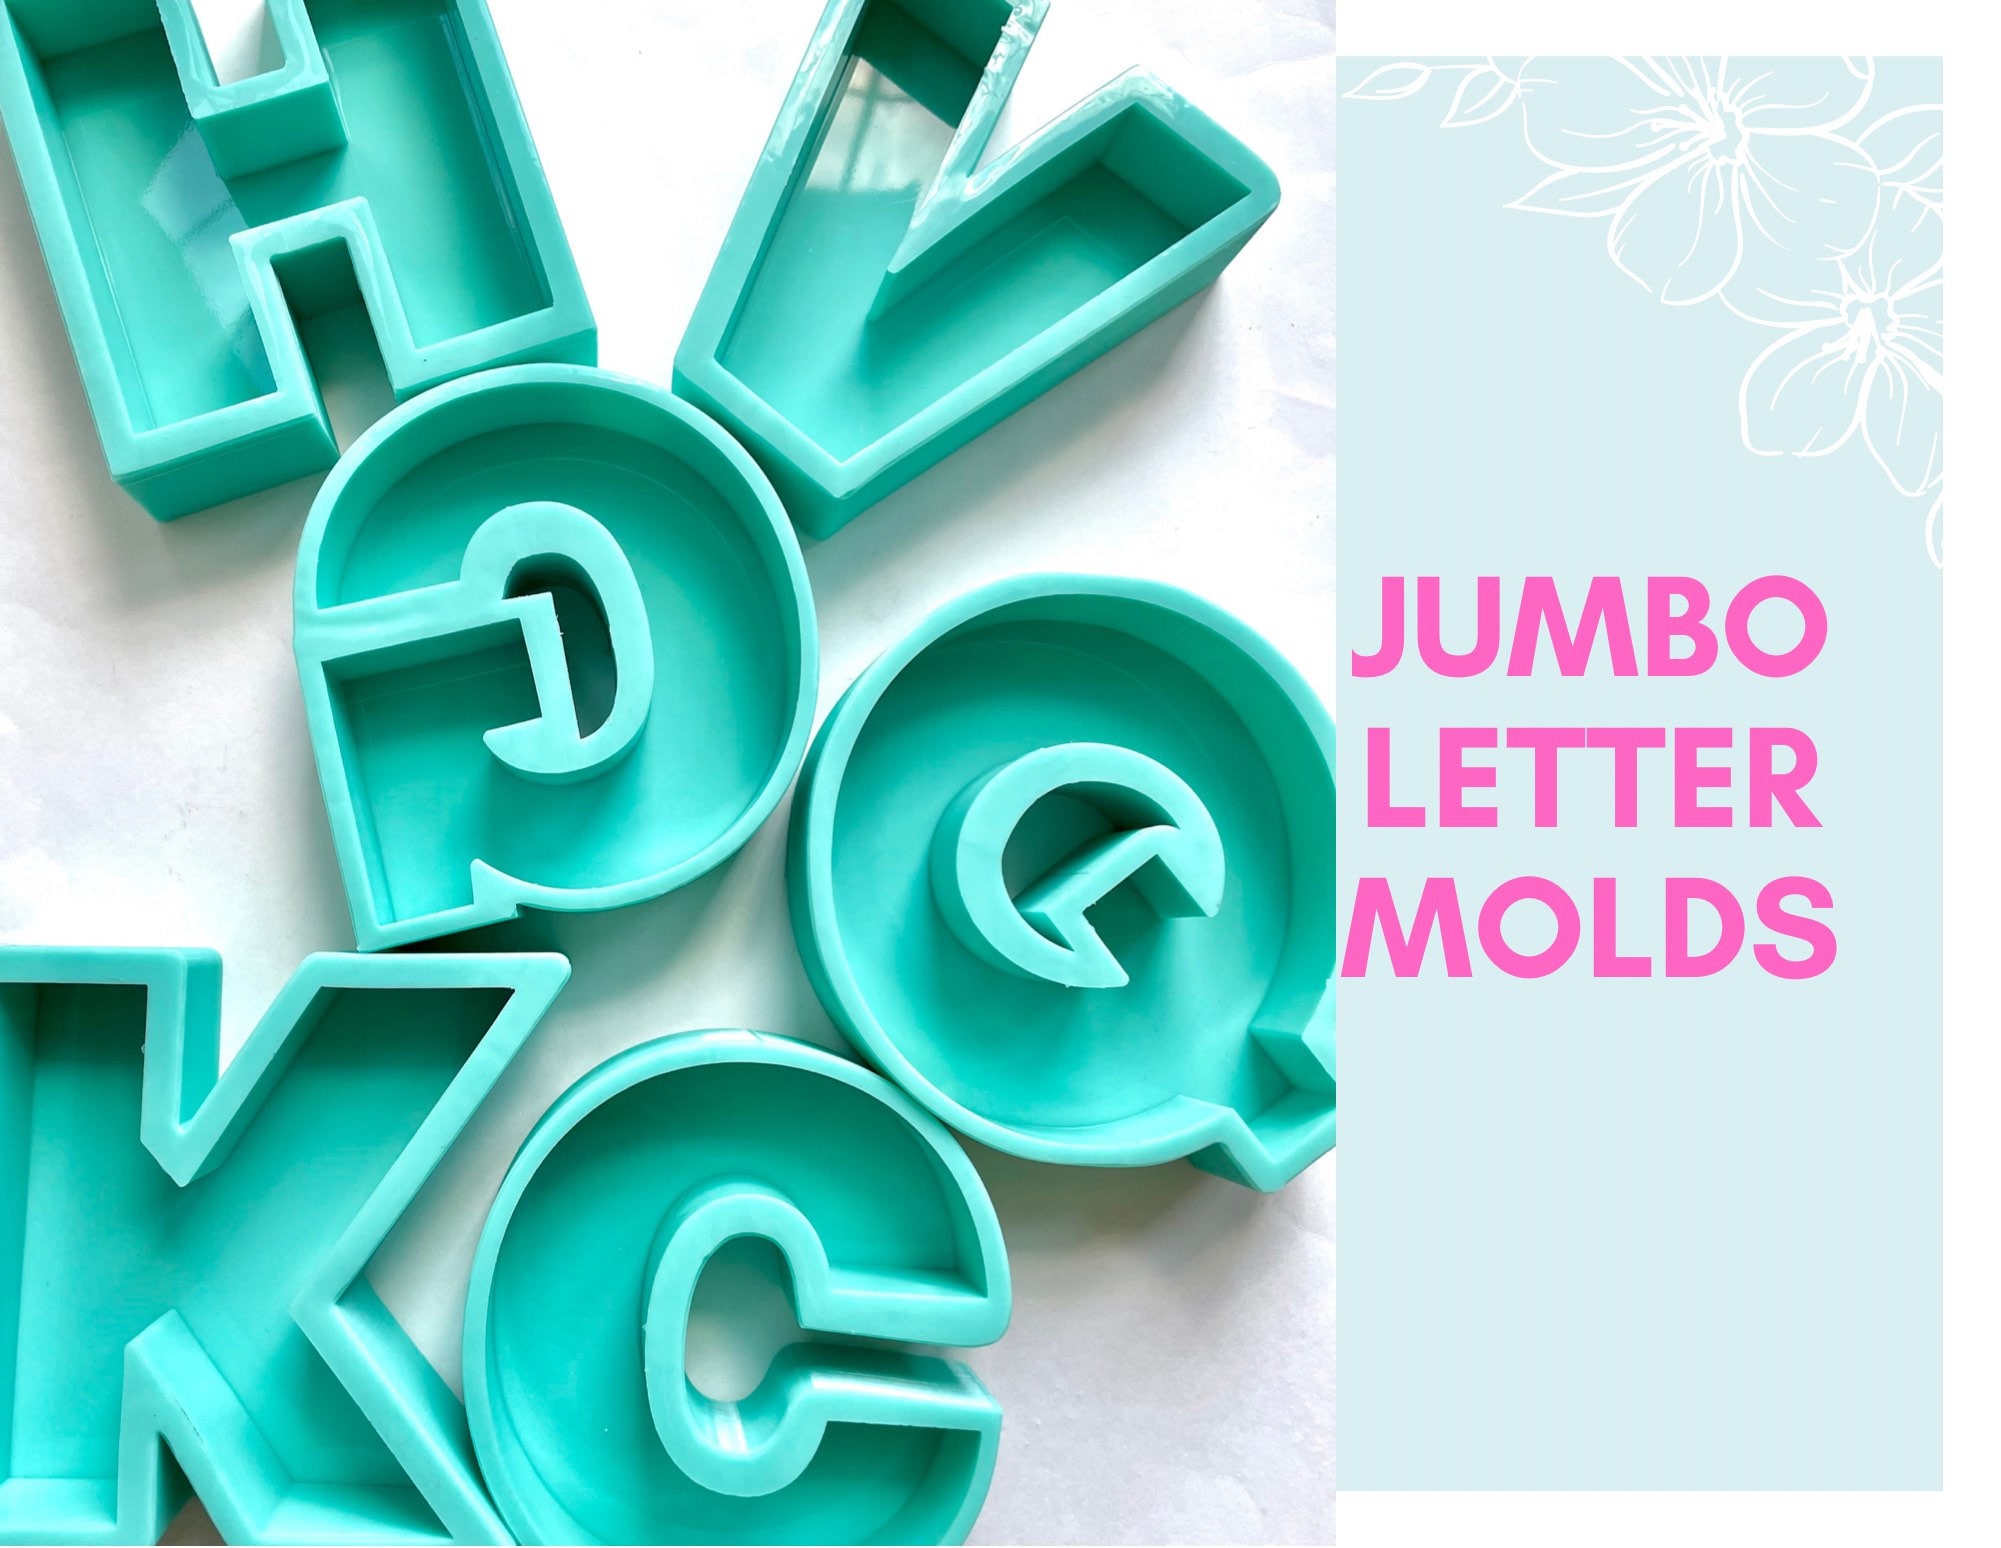 JUMBO Letter Molds for Resin and Concrete // Shiny Molds for Resin Casting  // High Quality Molds 